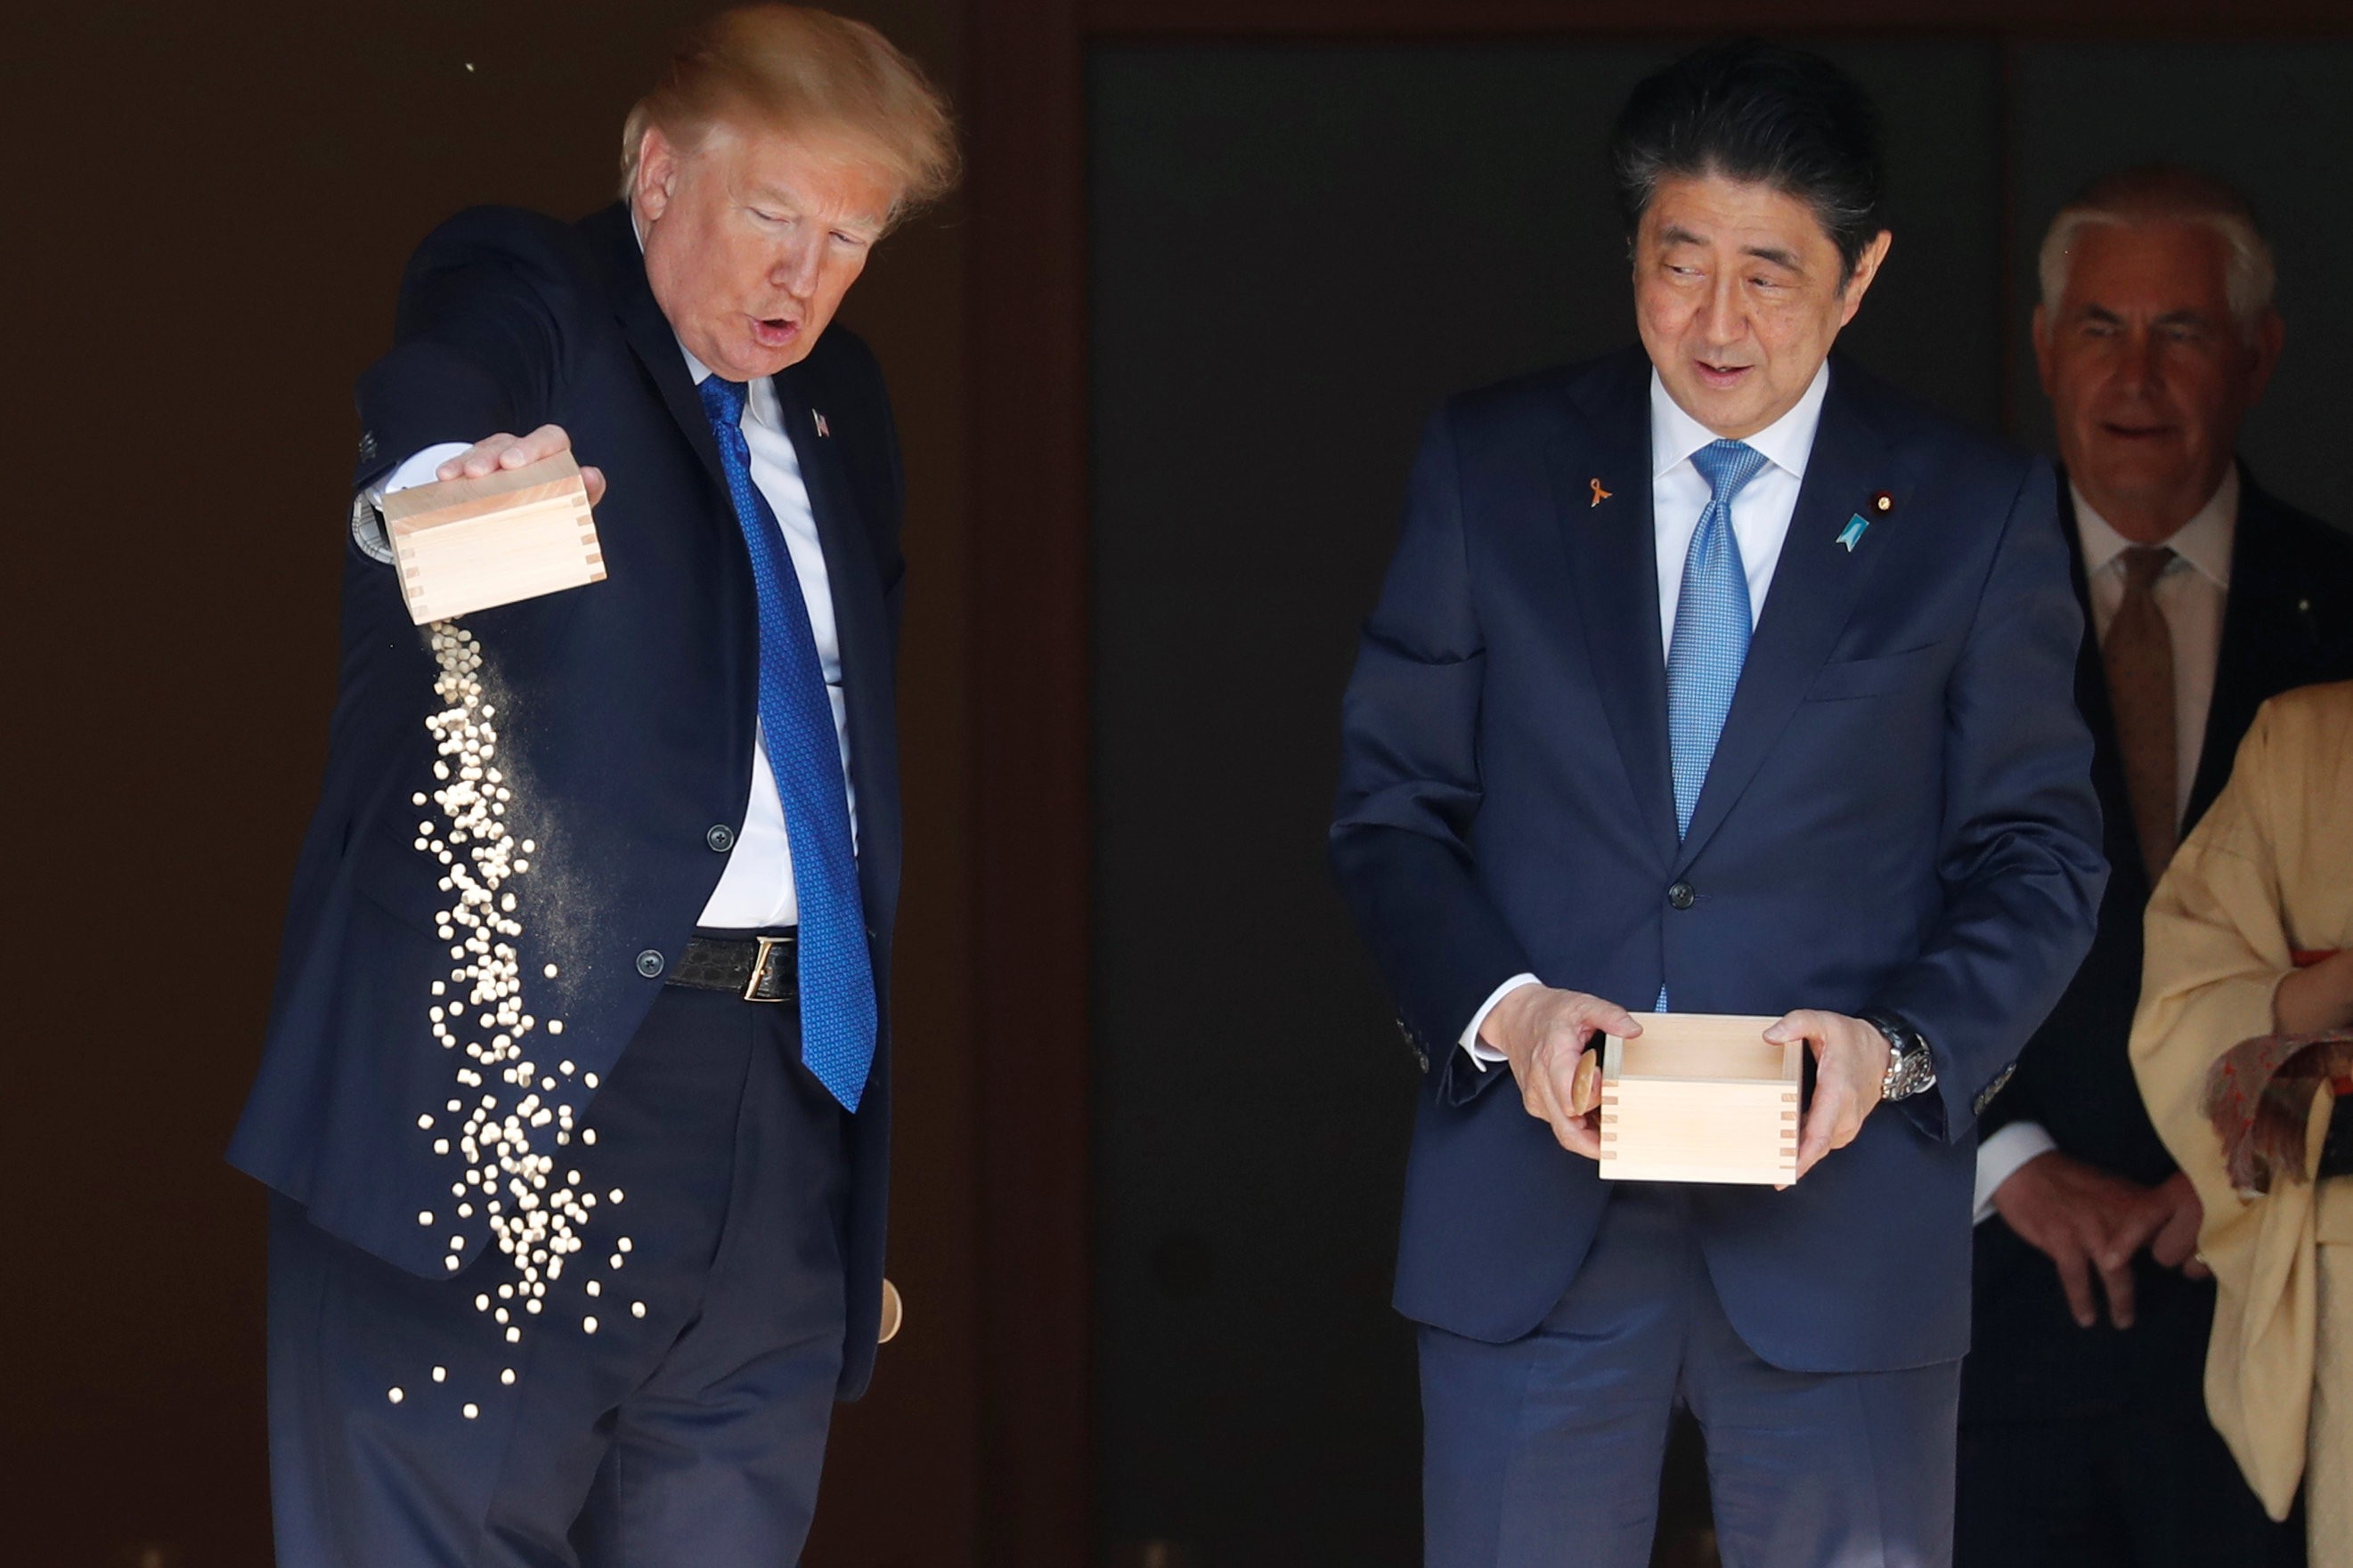 US President Donald Trump and Japan's Prime Minister Shinzo Abe take part in a ceremony to feed carp before their talks in Tokyo on November 6, 2017. Photo: Reuters